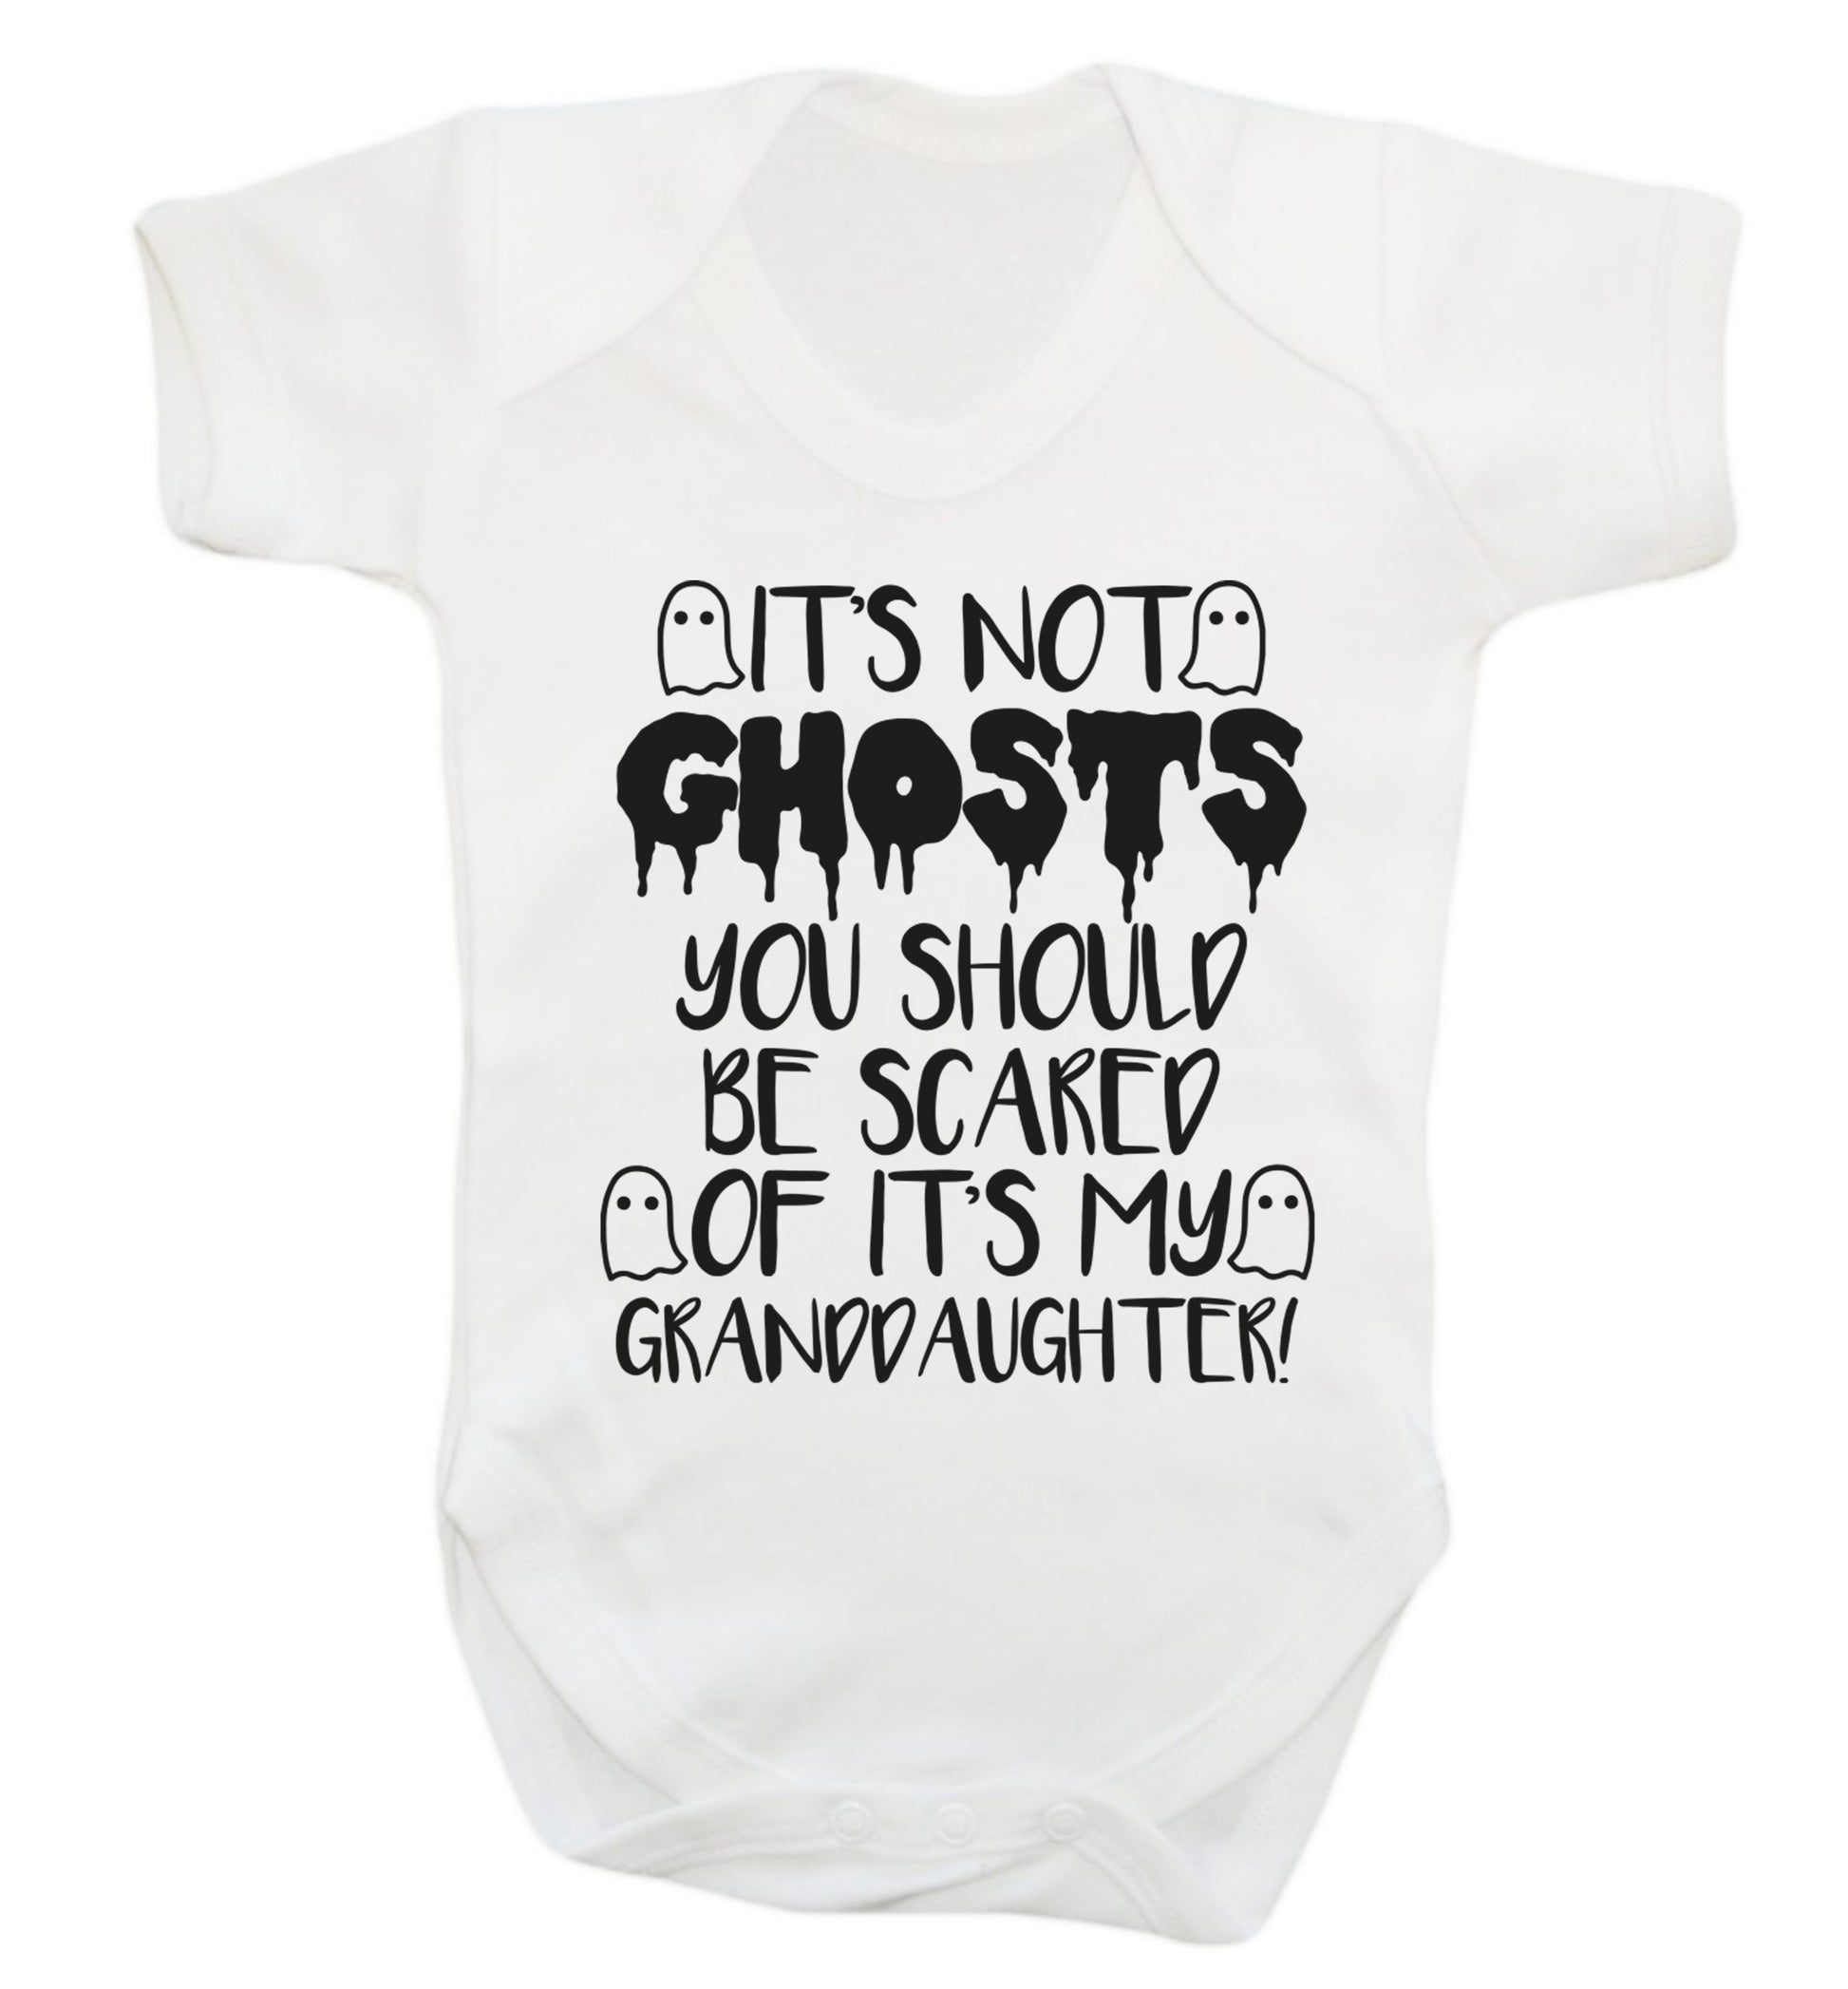 It's not ghosts you should be scared of it's my granddaughter! Baby Vest white 18-24 months